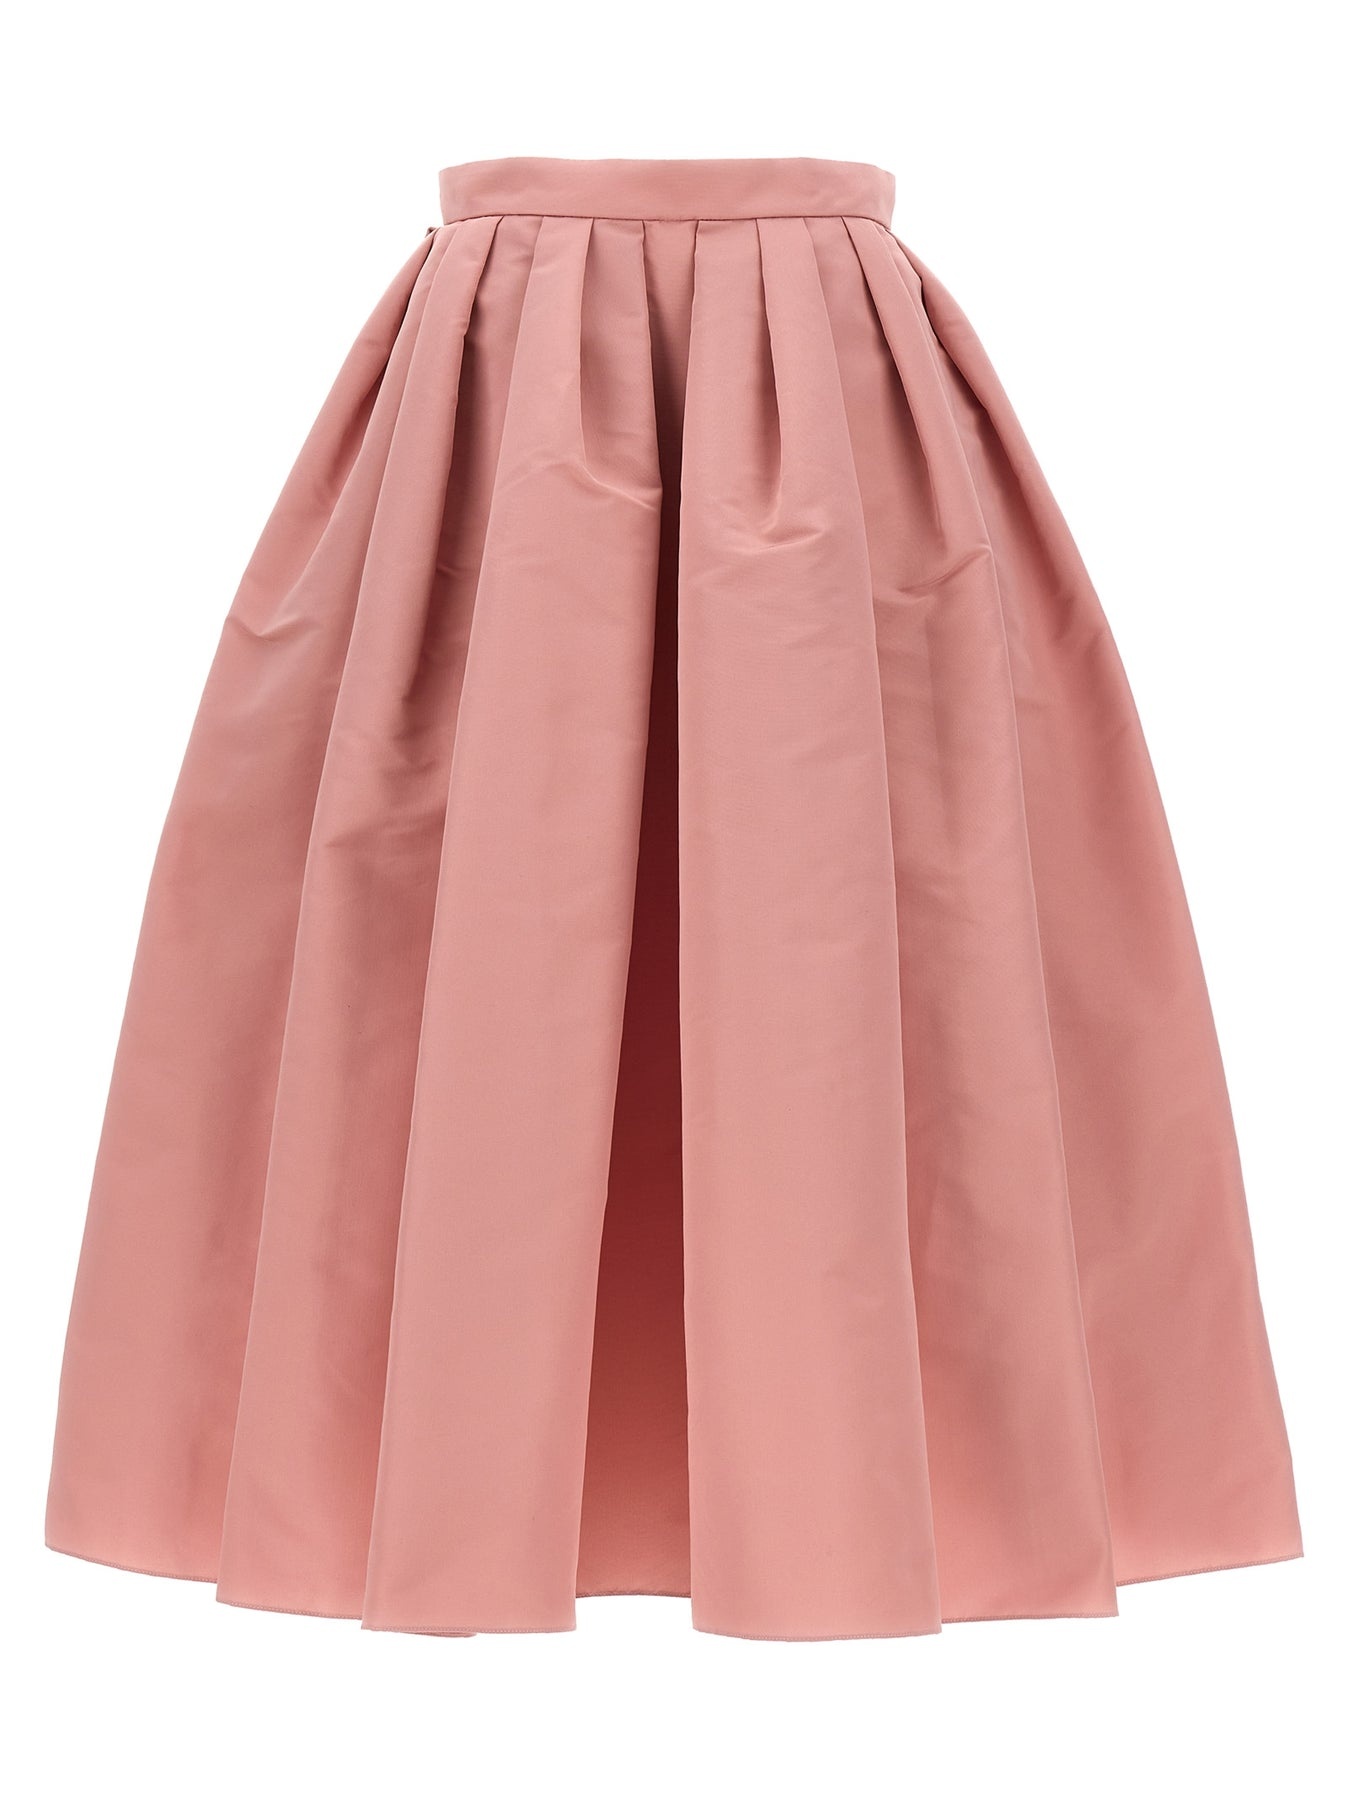 Psychedelic Pink Pleated Skirt